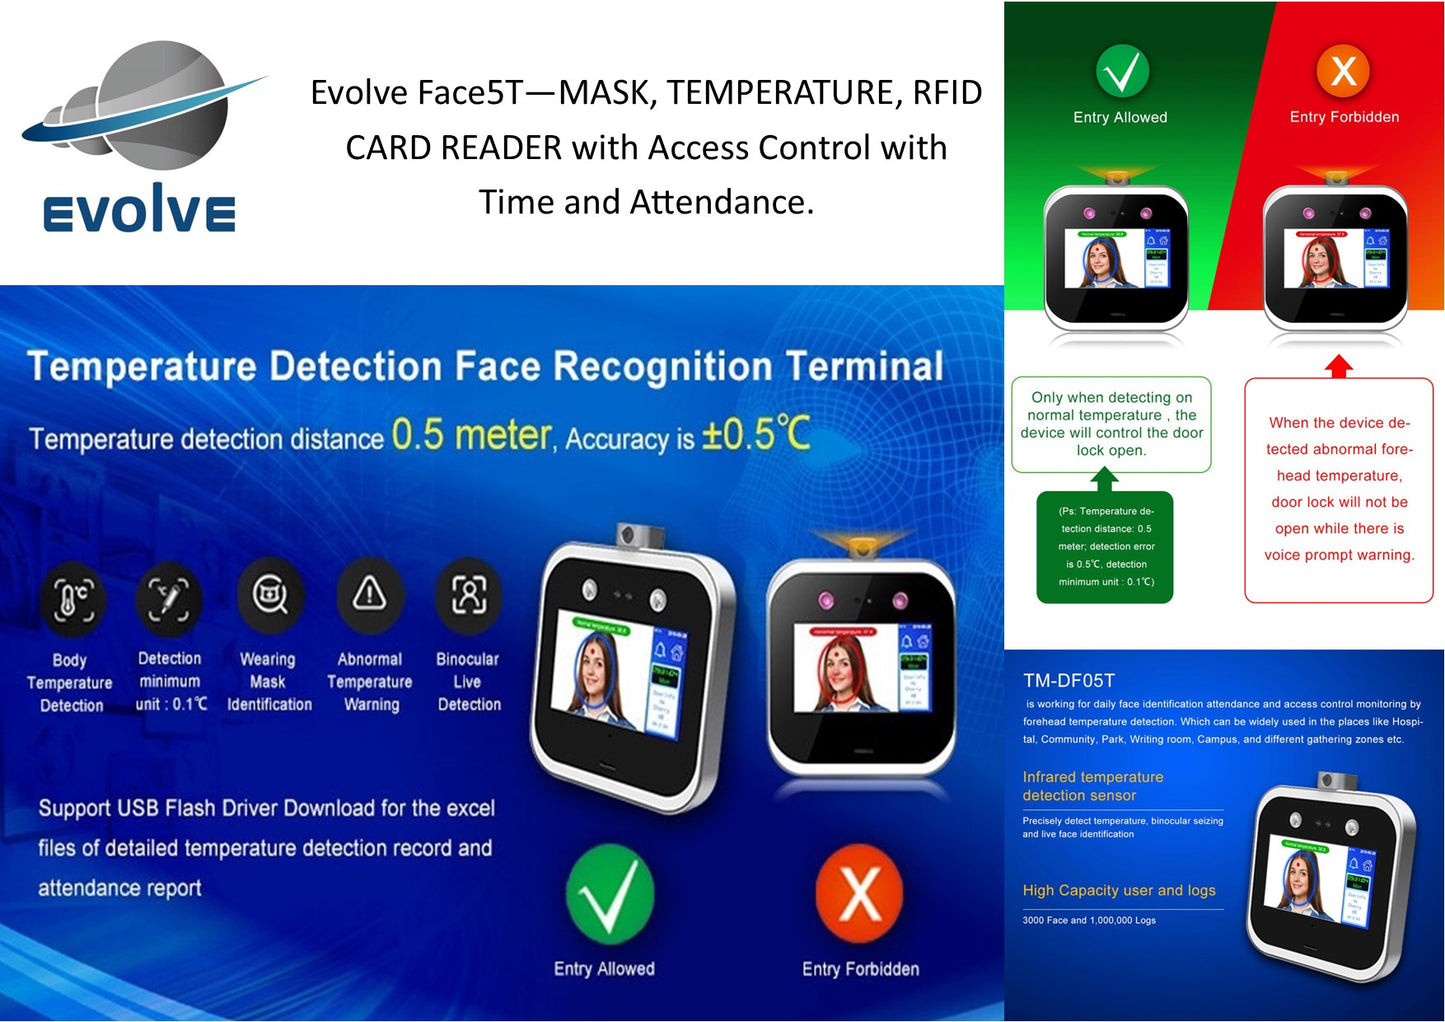 EvolveFace 5T Temperature and Mask